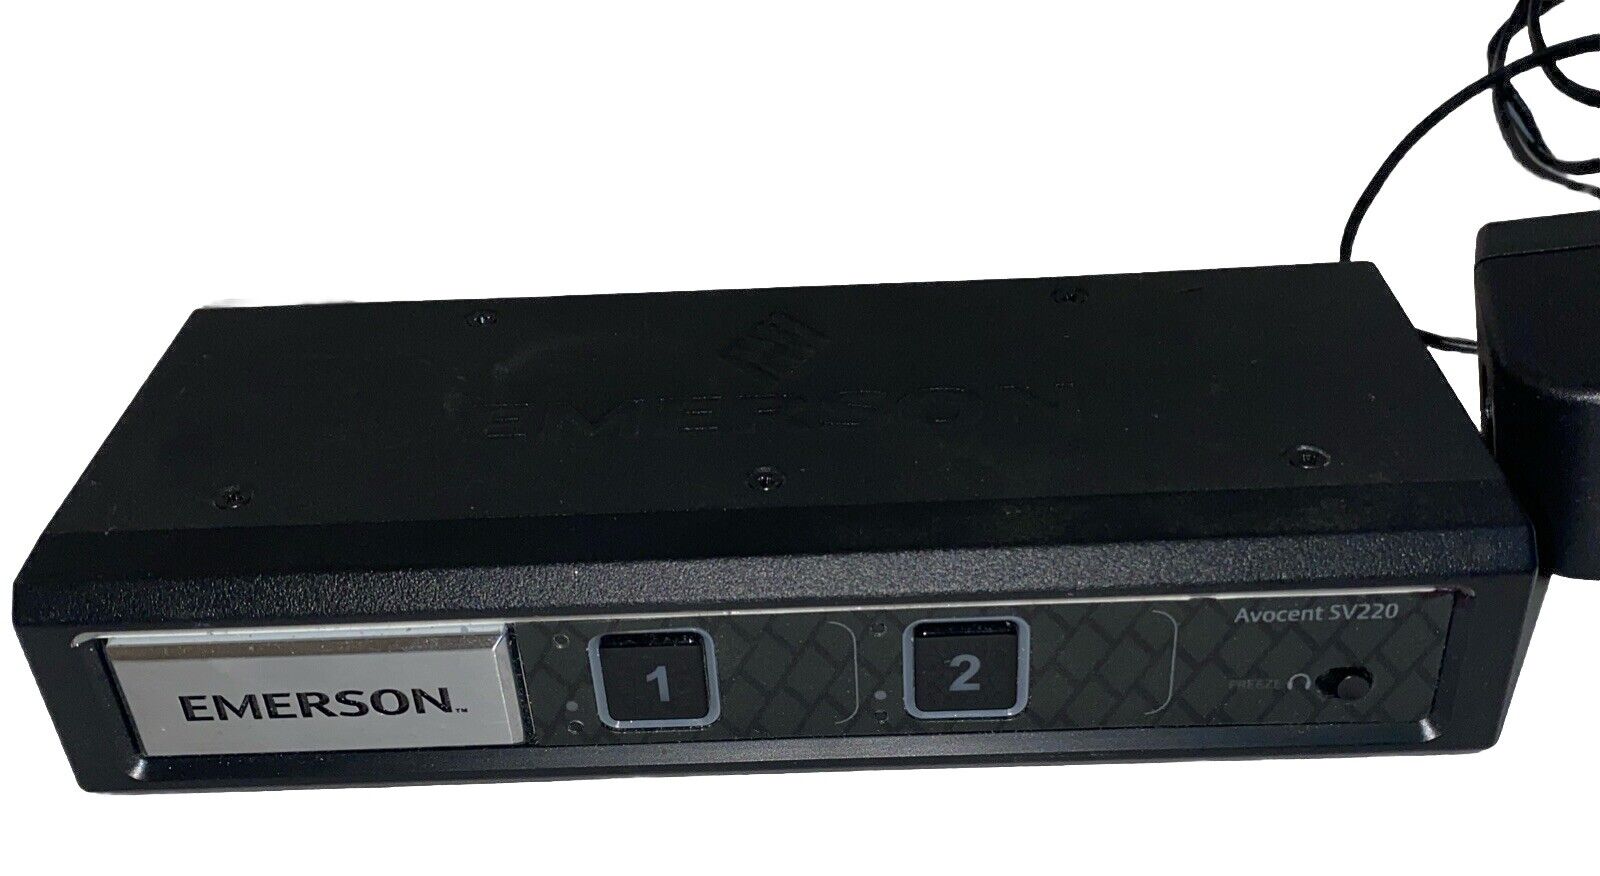 Emerson Avocent SV220 2 Port DVI-I KVM Switch With Power Supply USED